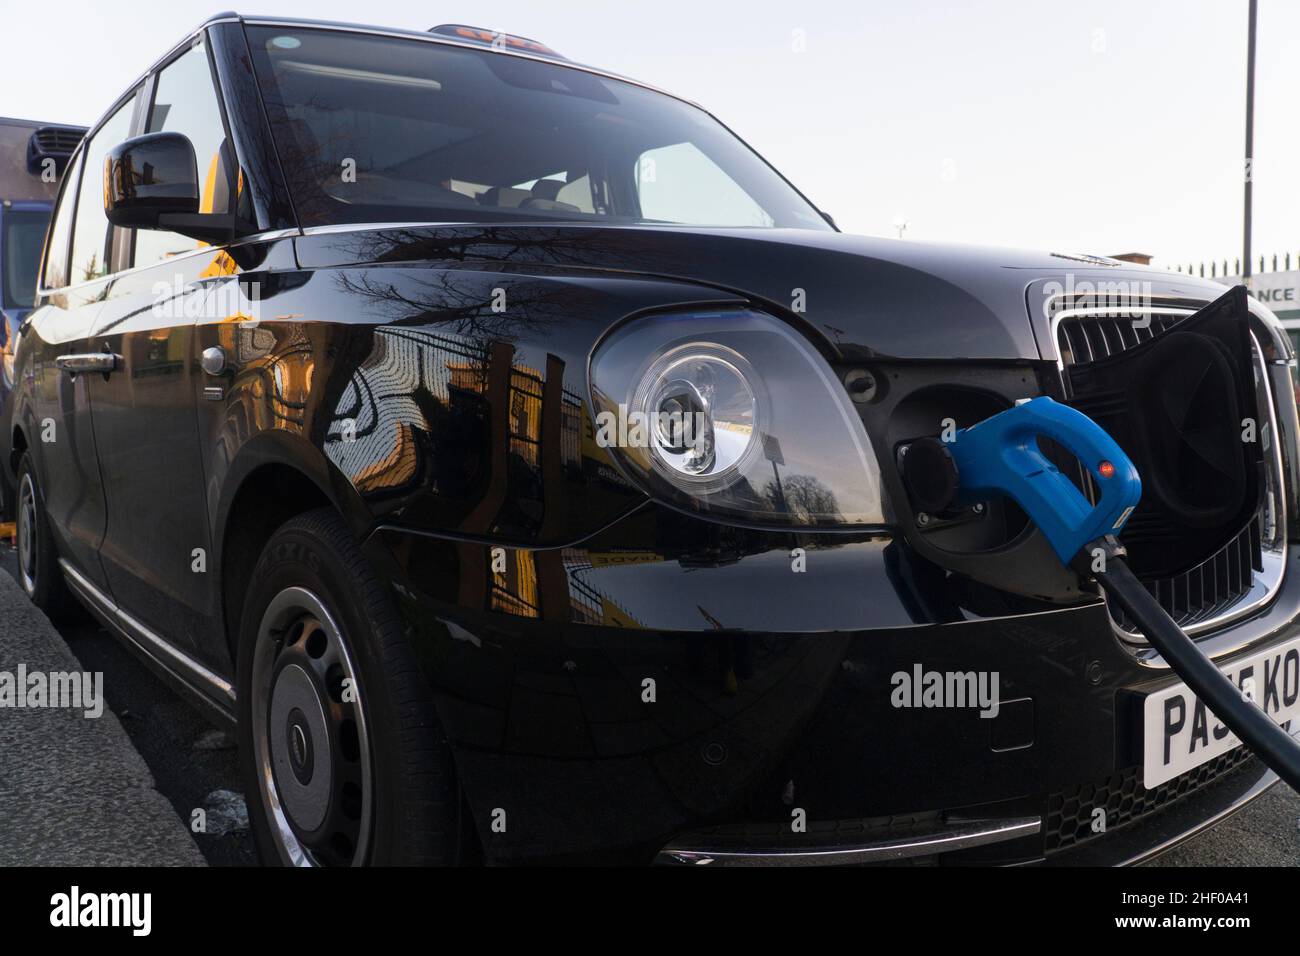 London, UK, 12 January 2022: An electric taxi recharges at a public charging point. Despite looking like a traditional black cab this vehicle has low emissions and makes less noise. Anna Watson/Alamy Stock Photo